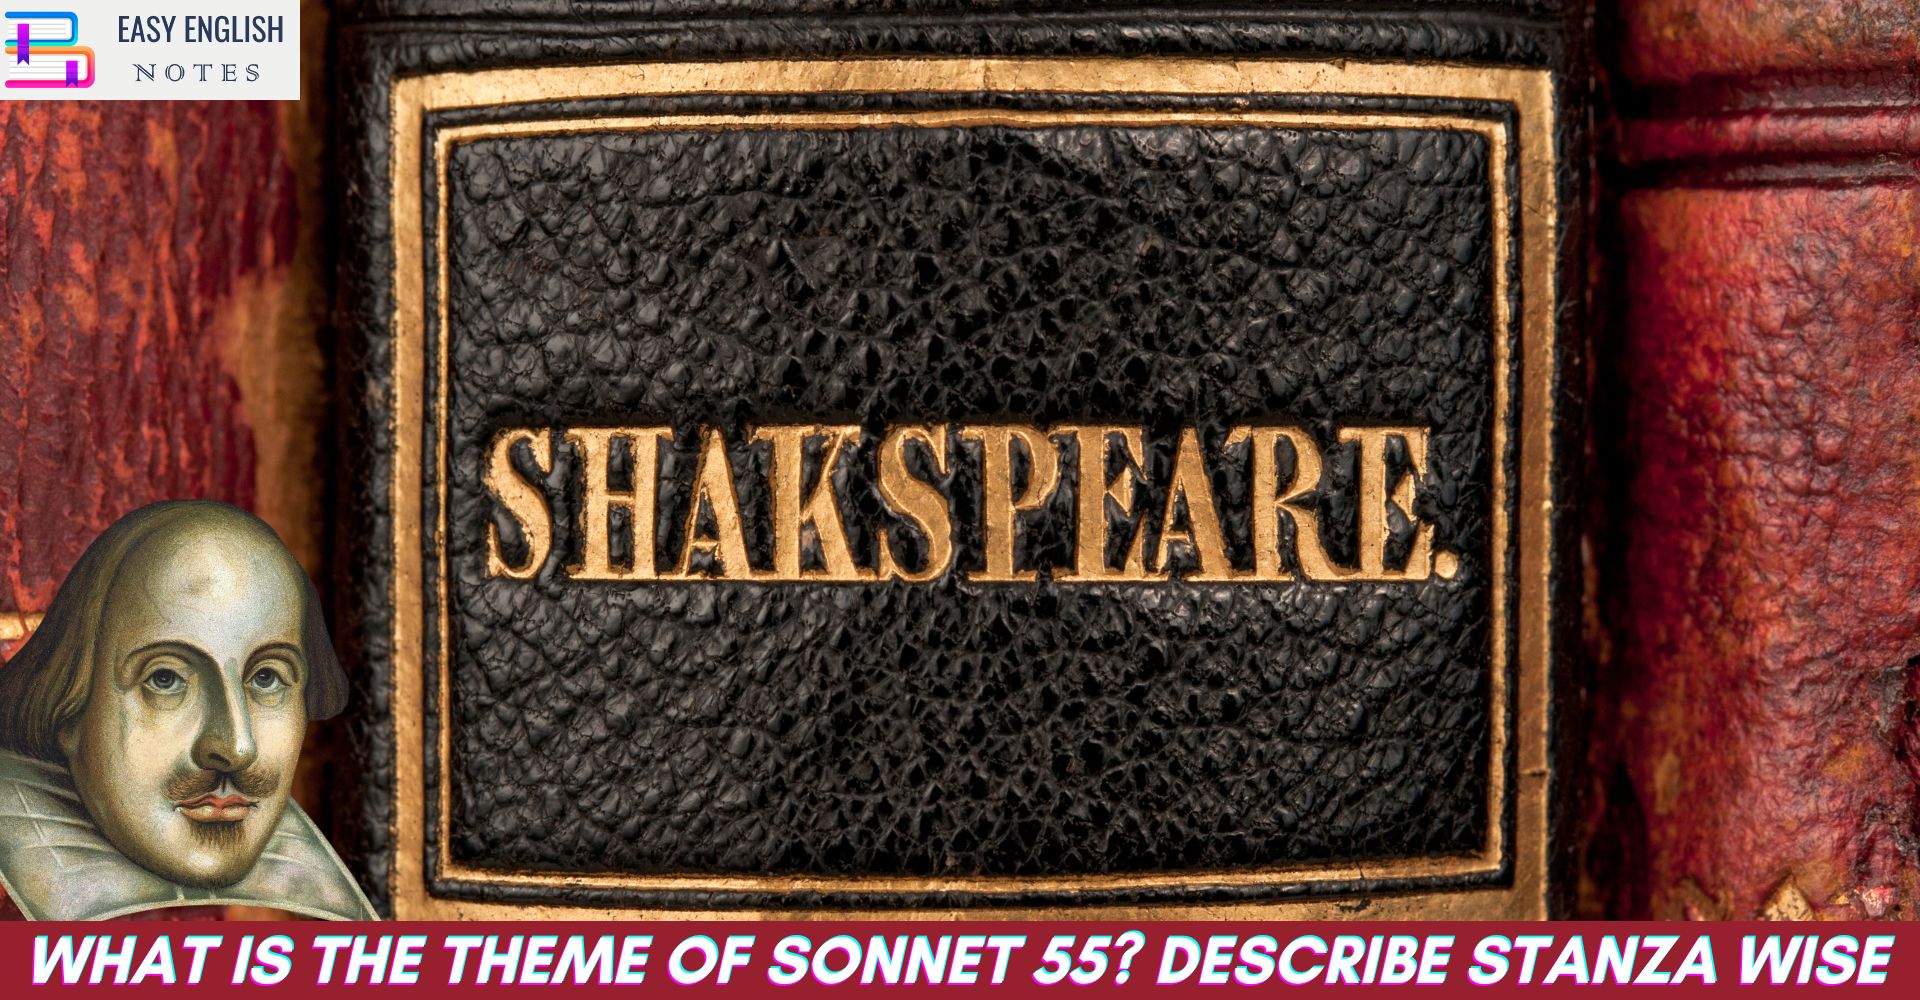 What is the theme of Sonnet 55? Describe stanza wise